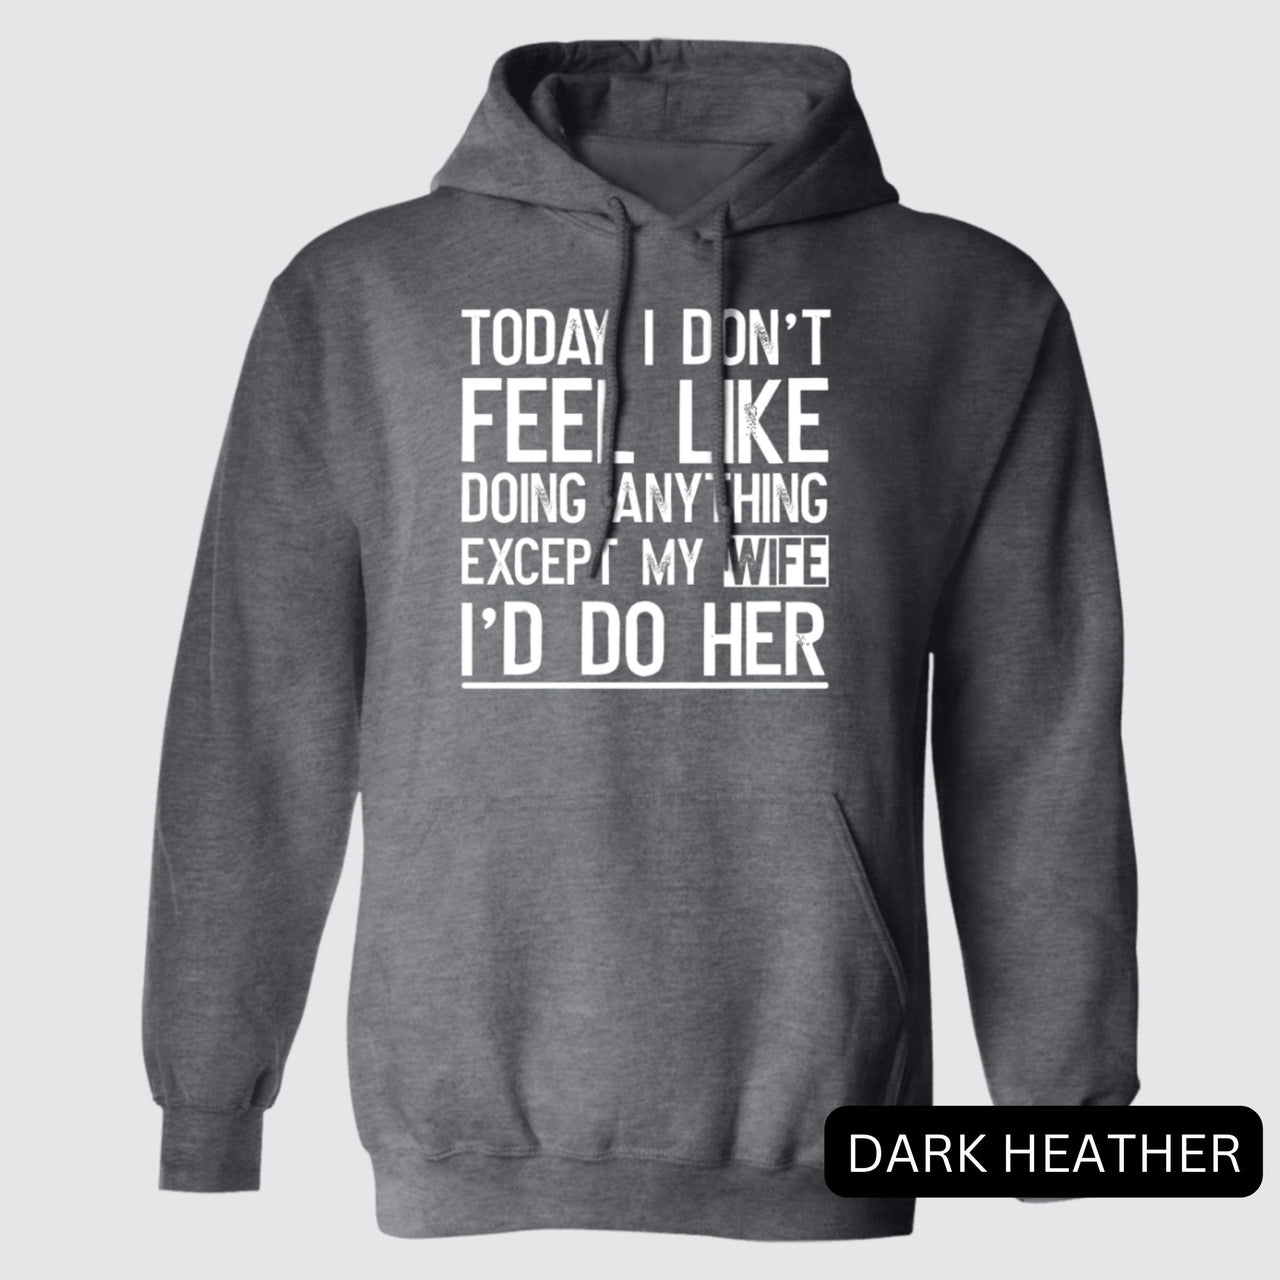 Today I Don't Feel Like Doing Anything Except My Wife I'd Do Her Hoodies